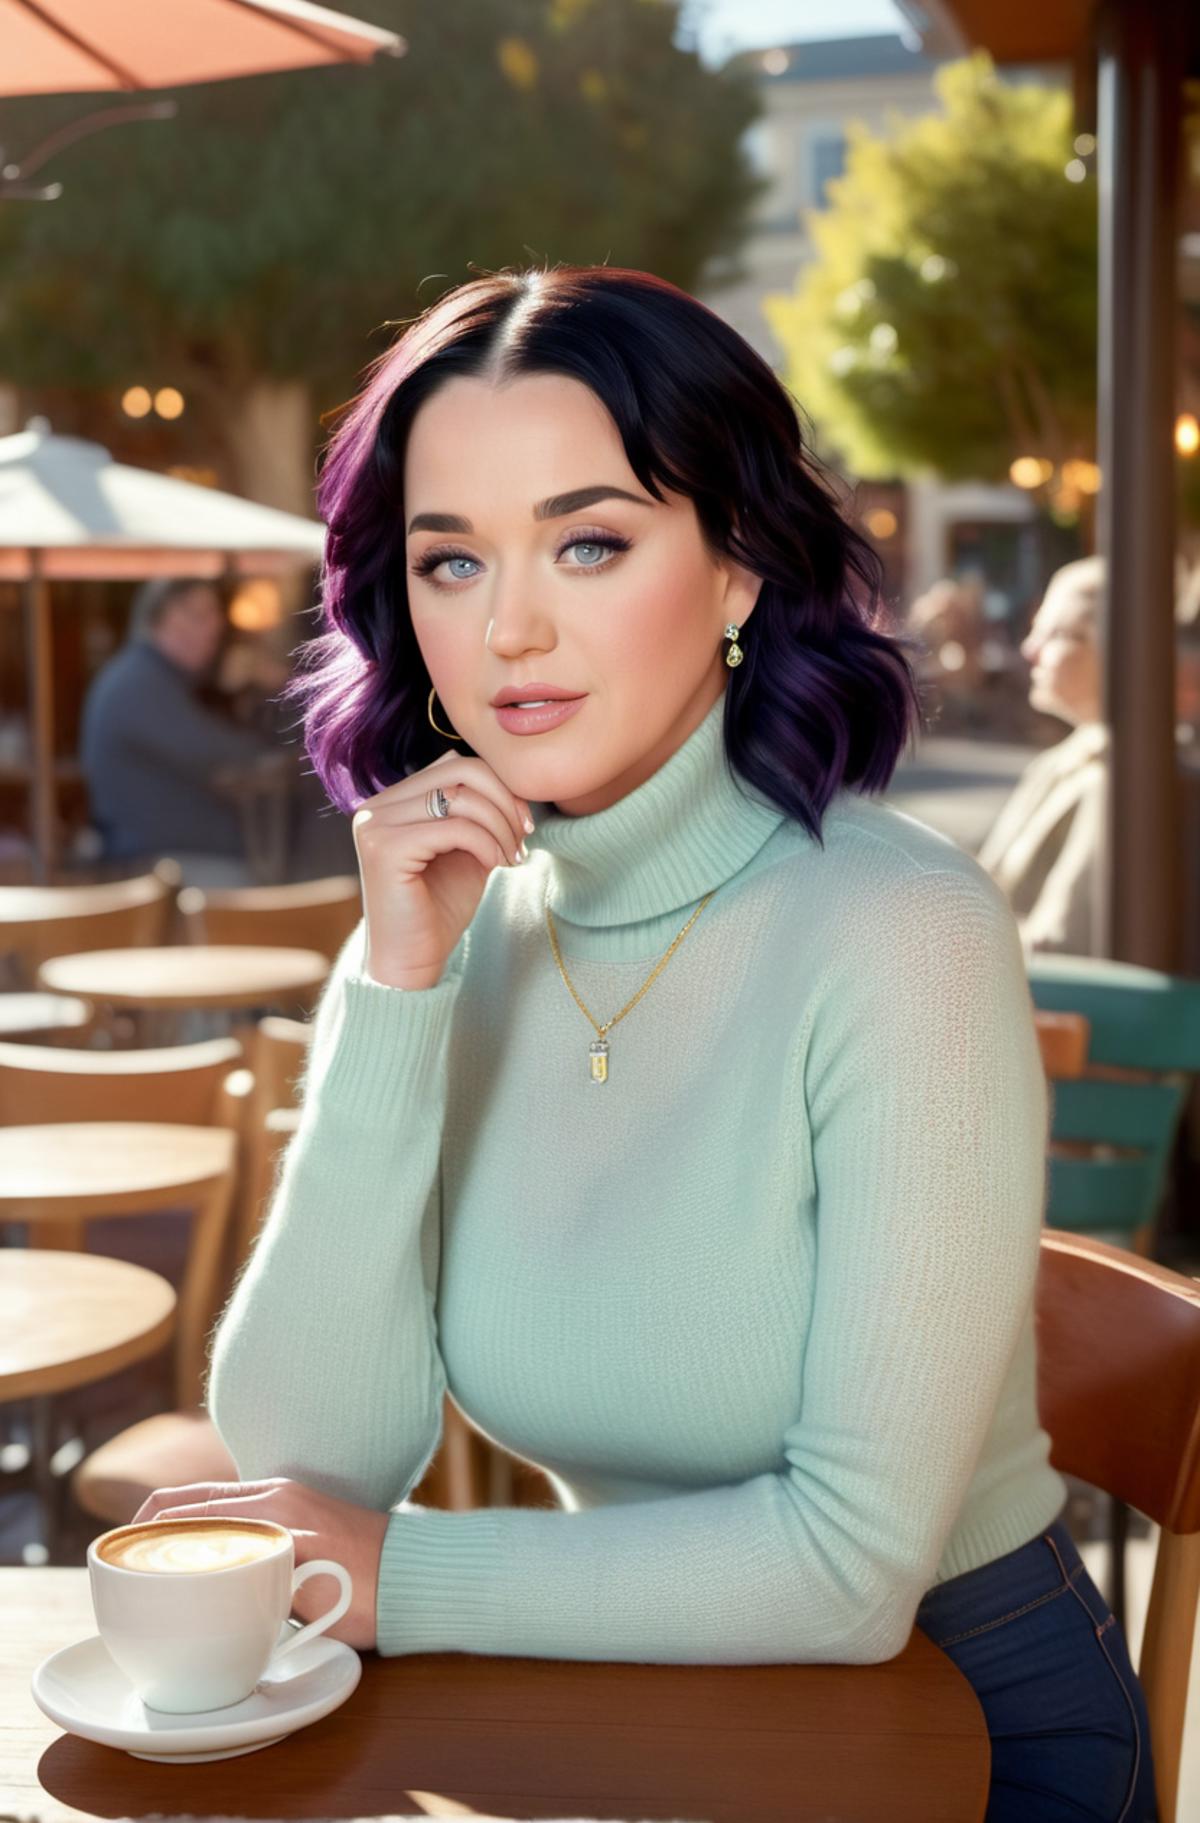 SDXL Katy Perry 2022/2023 image by ainow